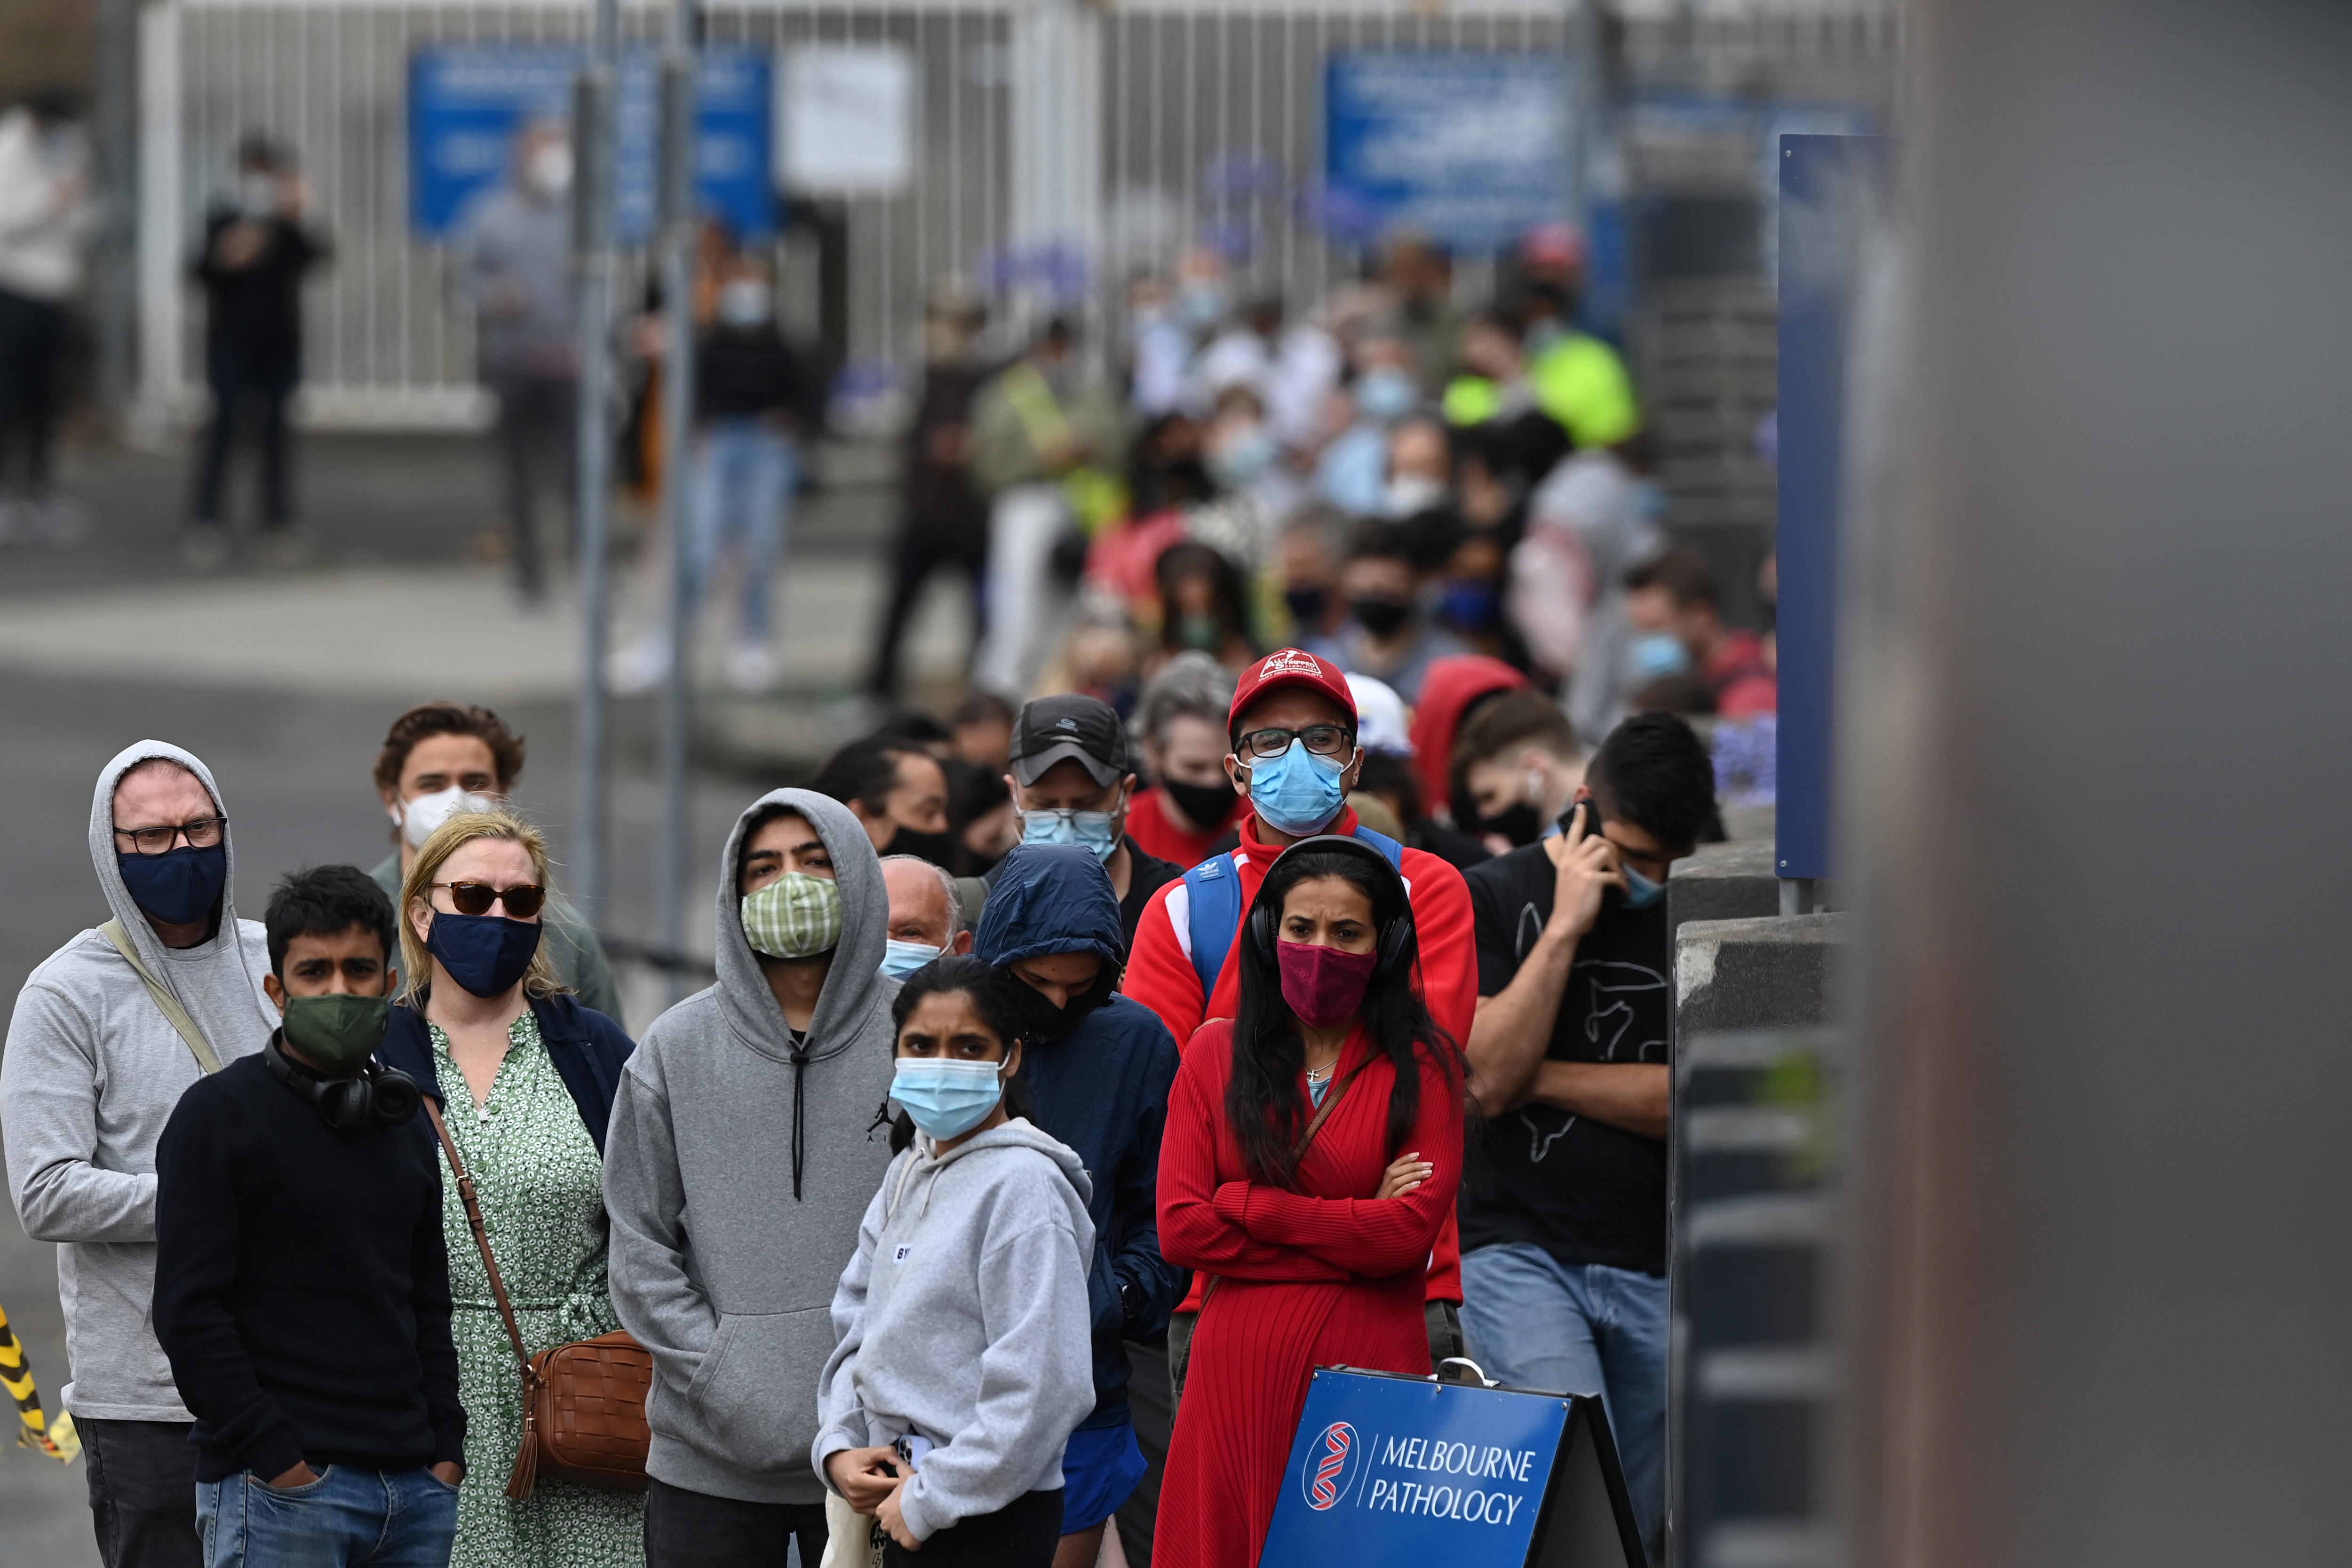 Members of the public wait to be tested at a pop up COVID clinic in Melbourne's North, Wednesday, December 22, 2021. Victoria is considering tightening indoor mask mandates, as testing sites continue to be inundated. (AAP Image/Joel Carrett) NO ARCHIVING